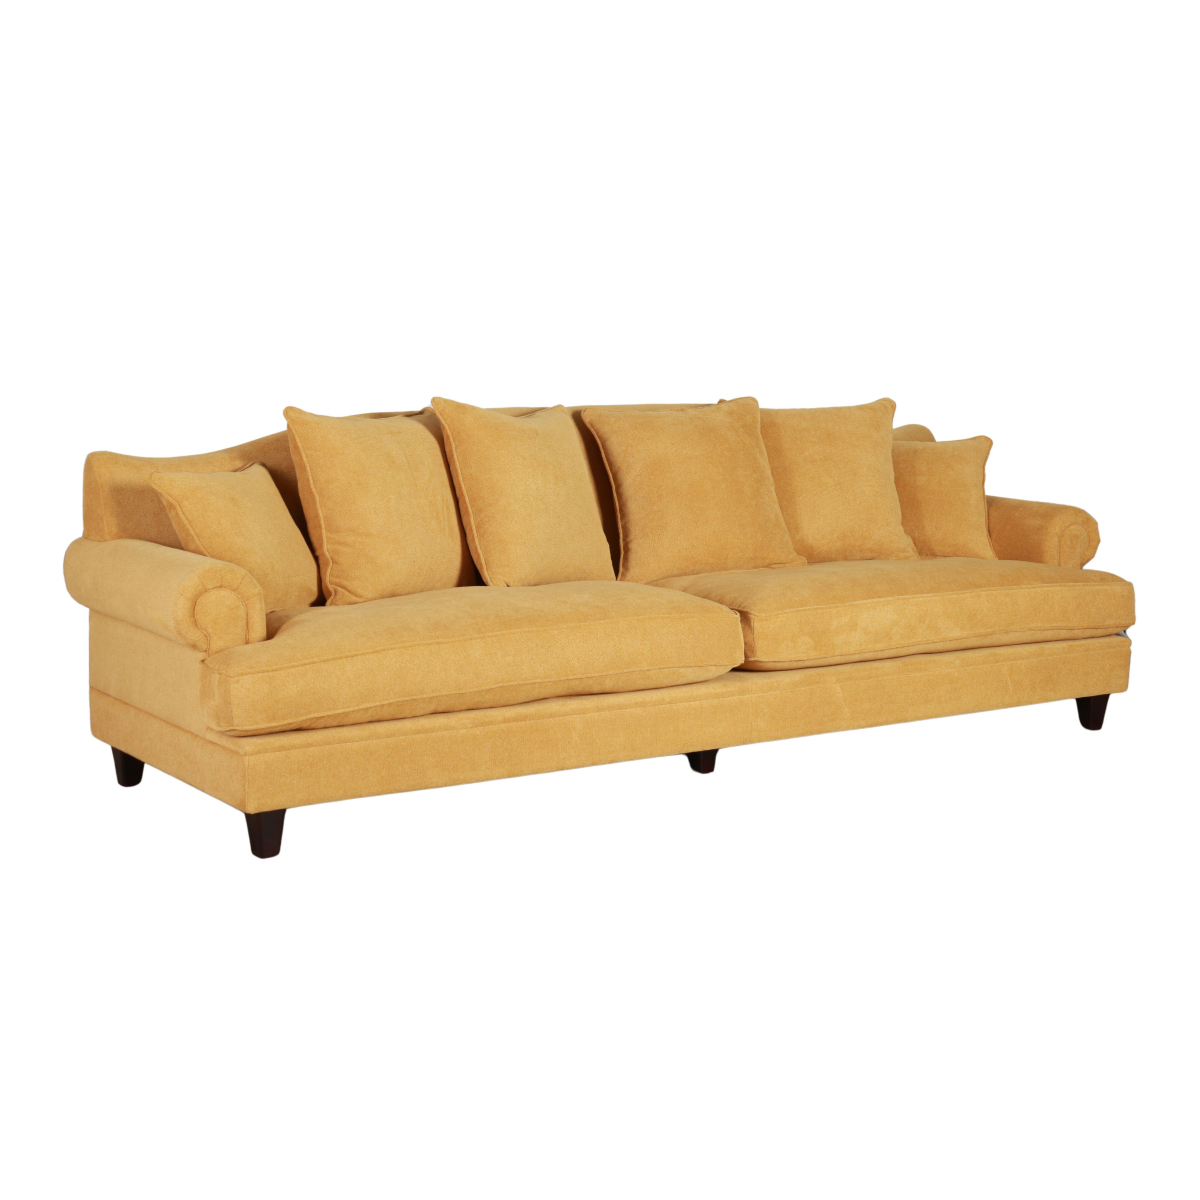 lucerne sofa upholstered in yellow chenille fabric